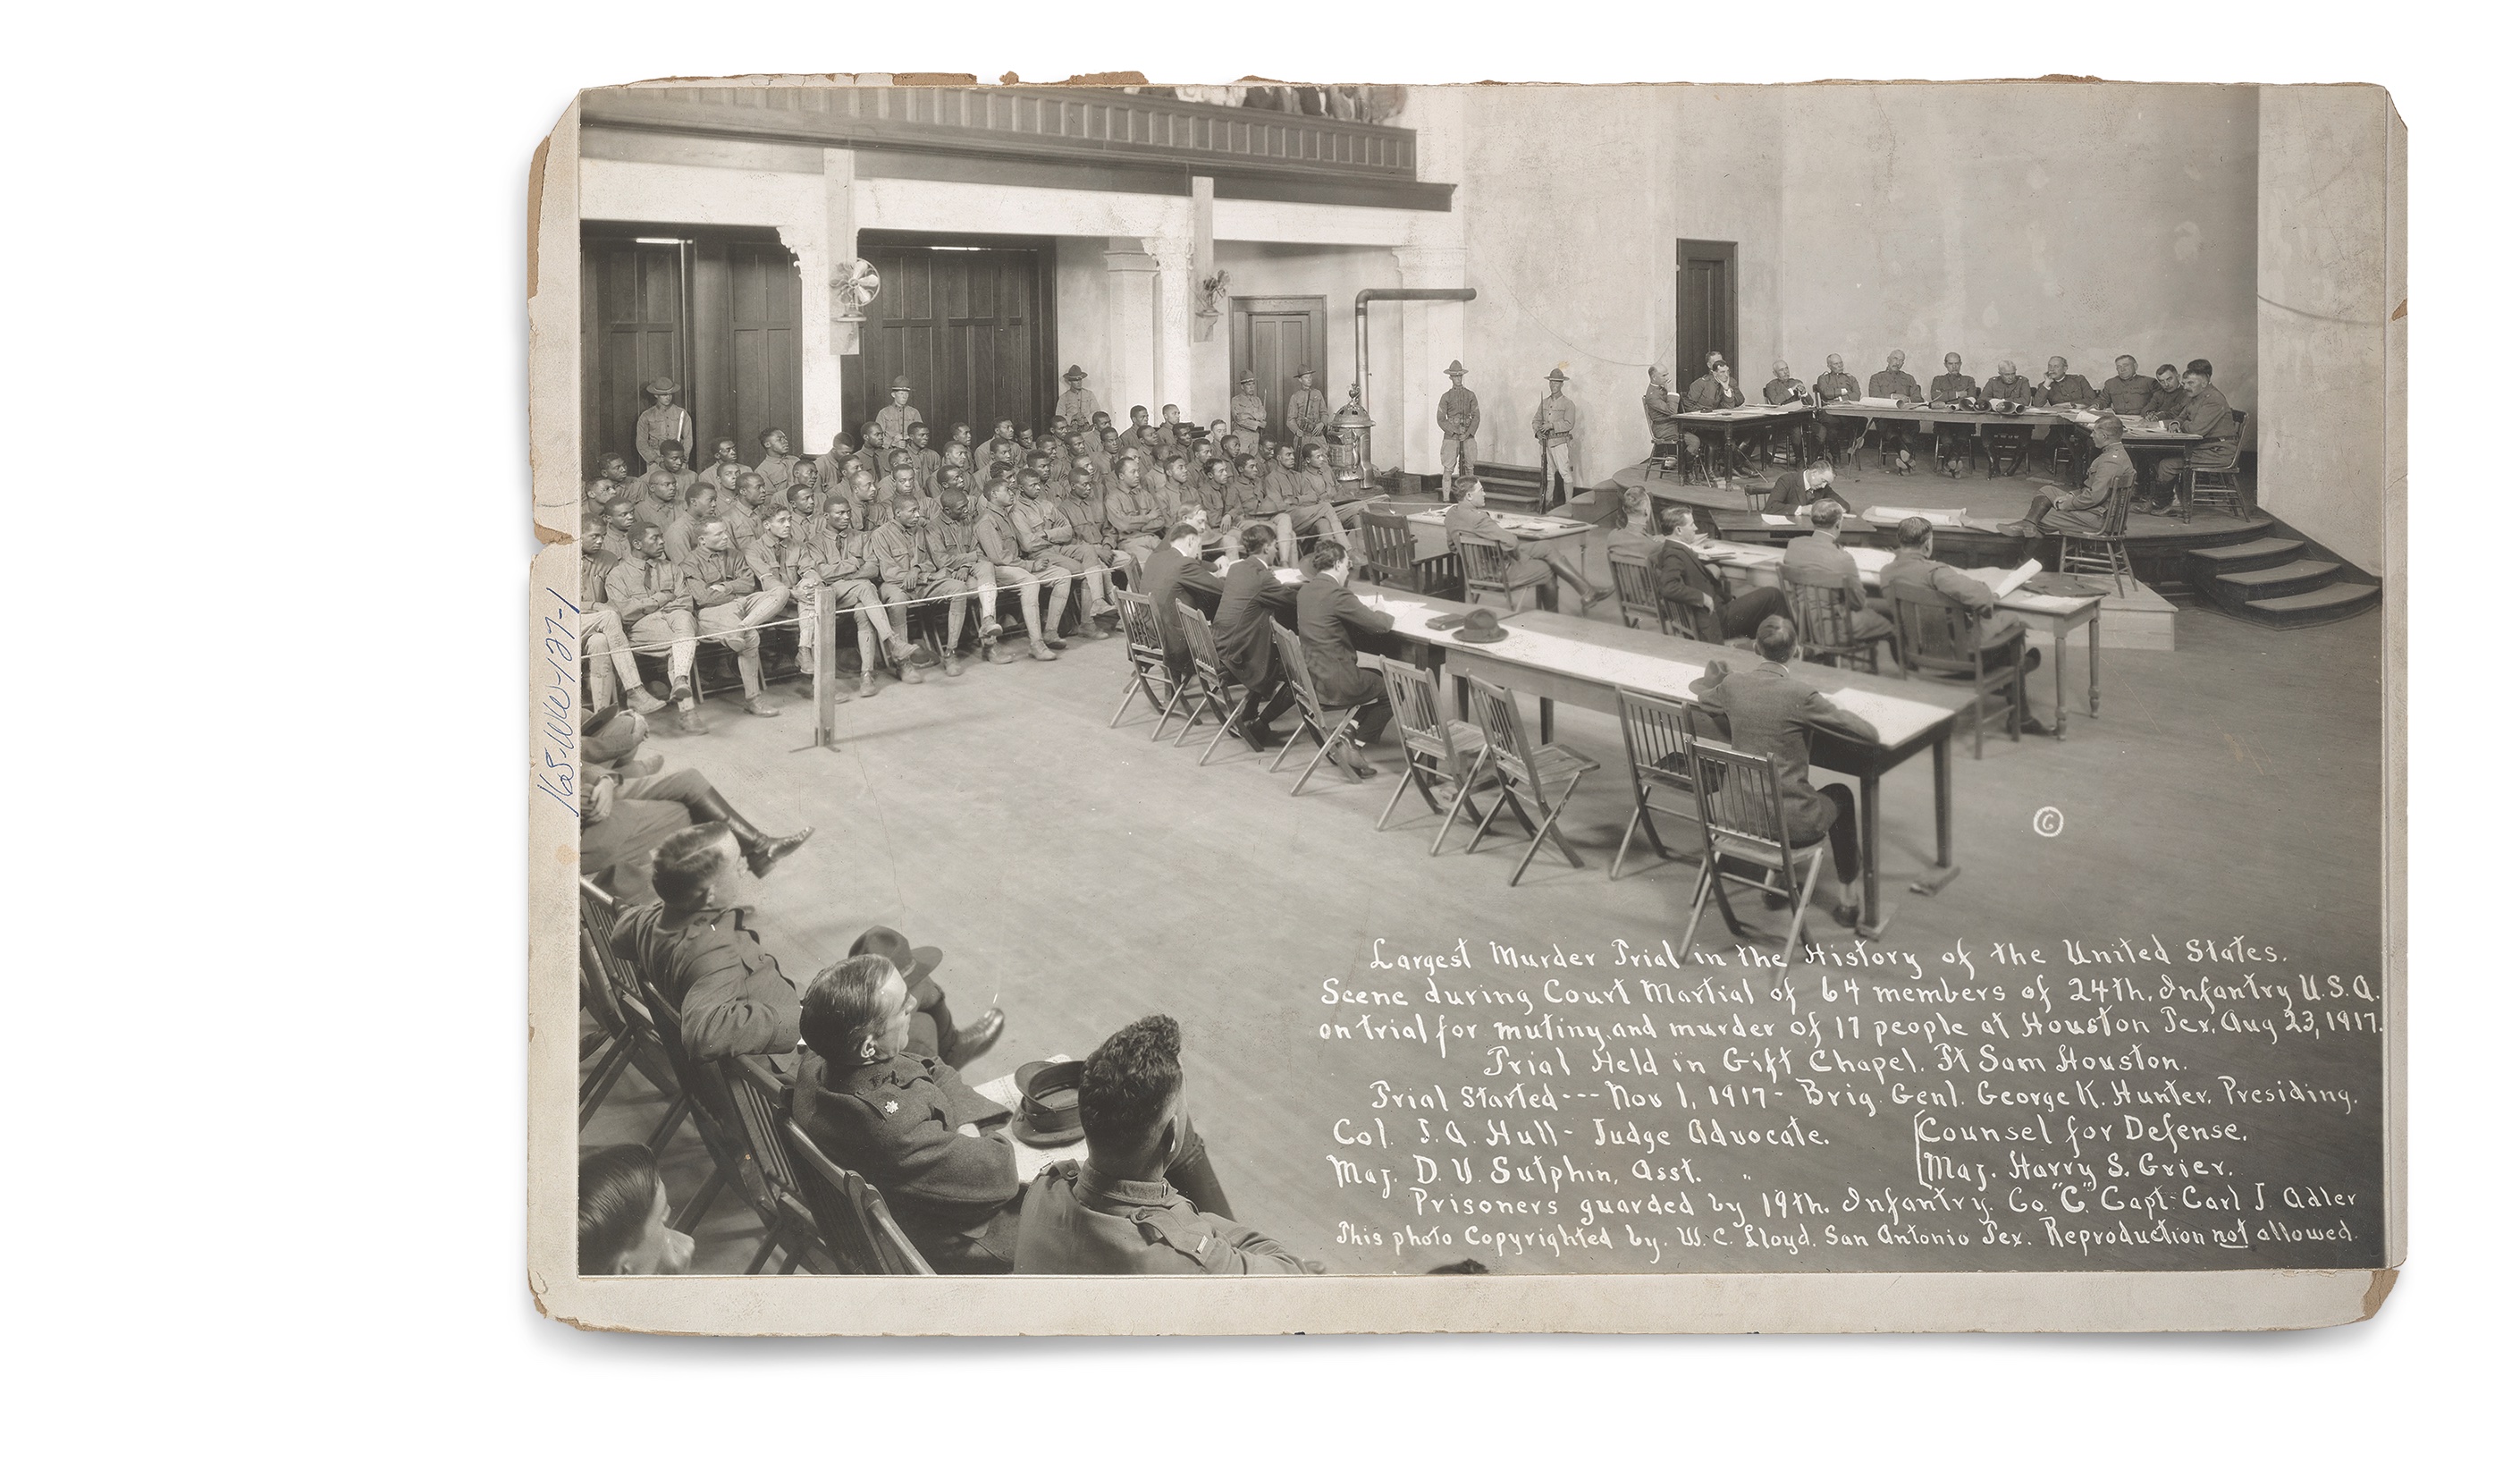 This photograph, taken on August 23, 1917, and captioned “Largest Murder Trial in the History of the United States,” shows nearly all of the 63 African American defendants in the first court-martial. (National Archives)